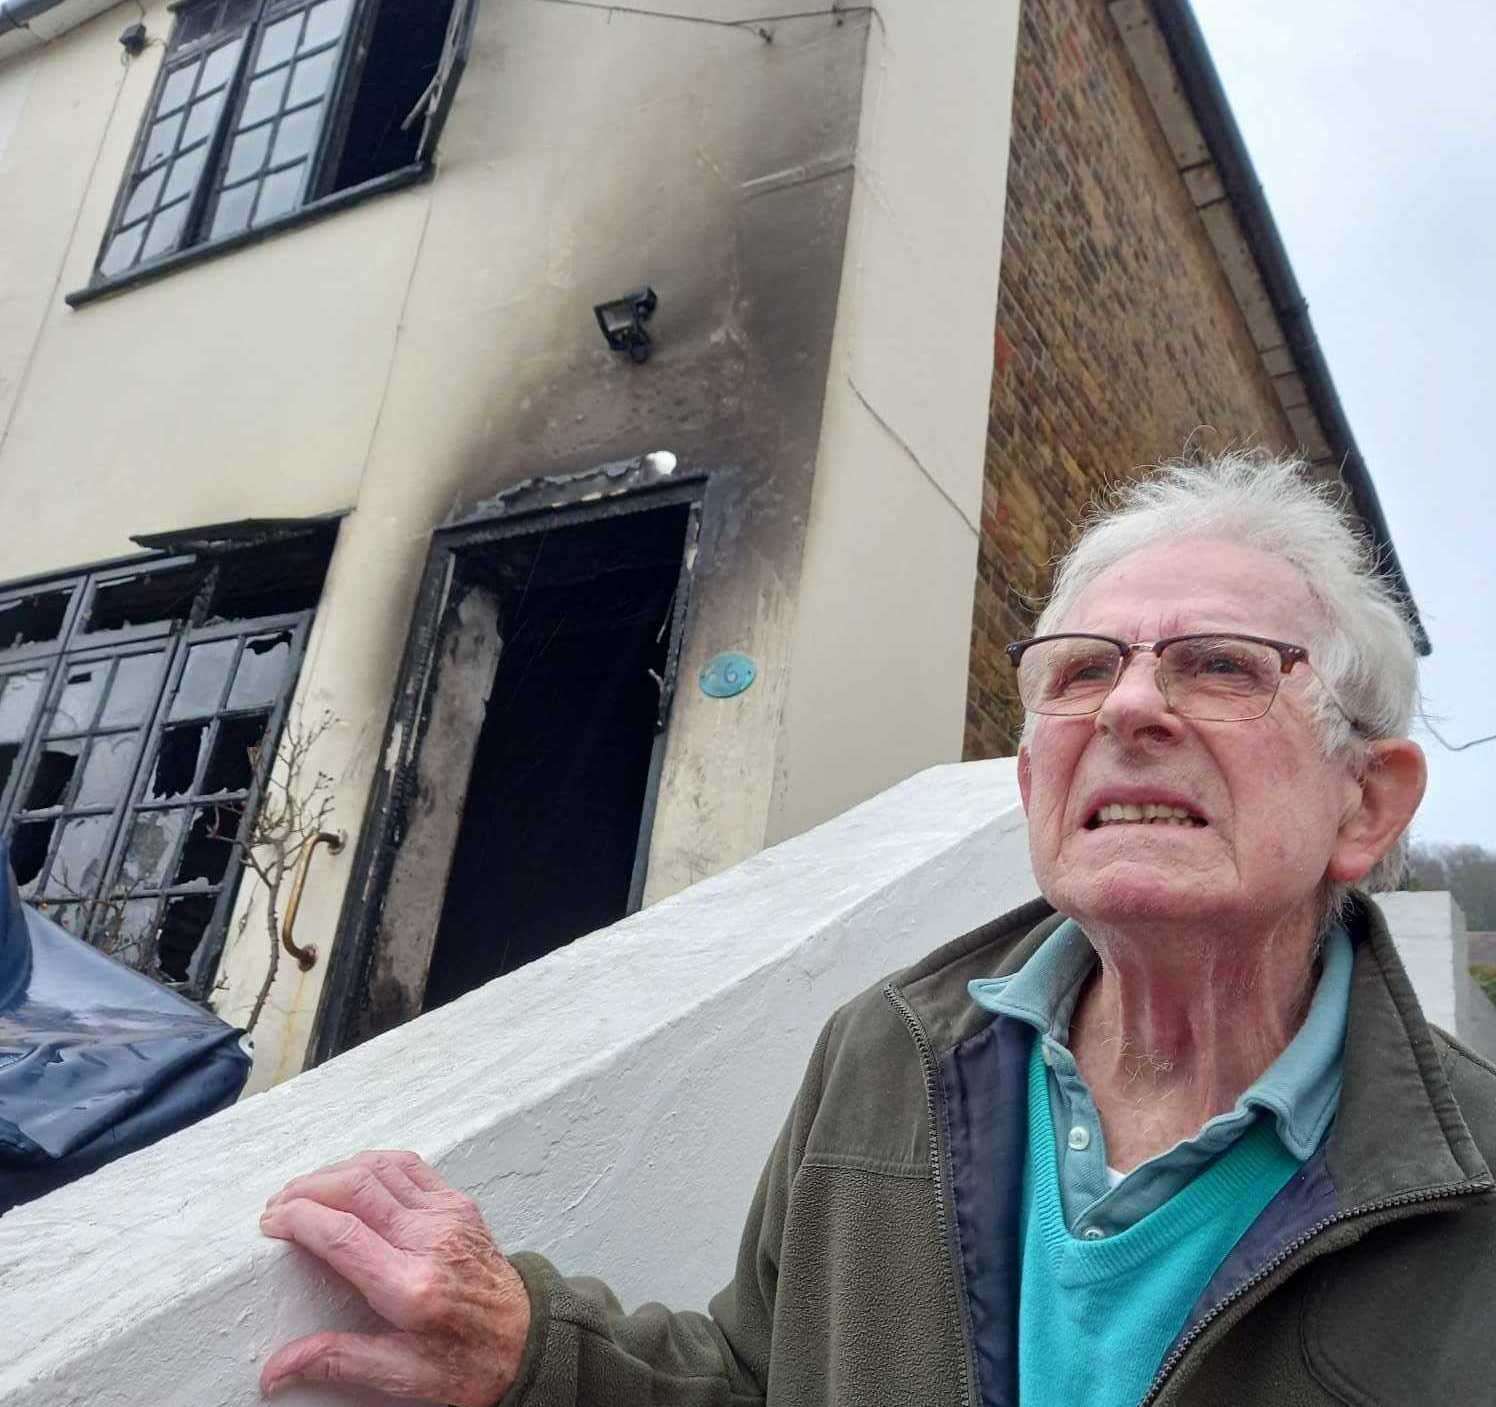 Mr Pratt, from Sandgate, saved his disabled neighbour's life after a fire broke out in her home. Picture: Annette Pratt